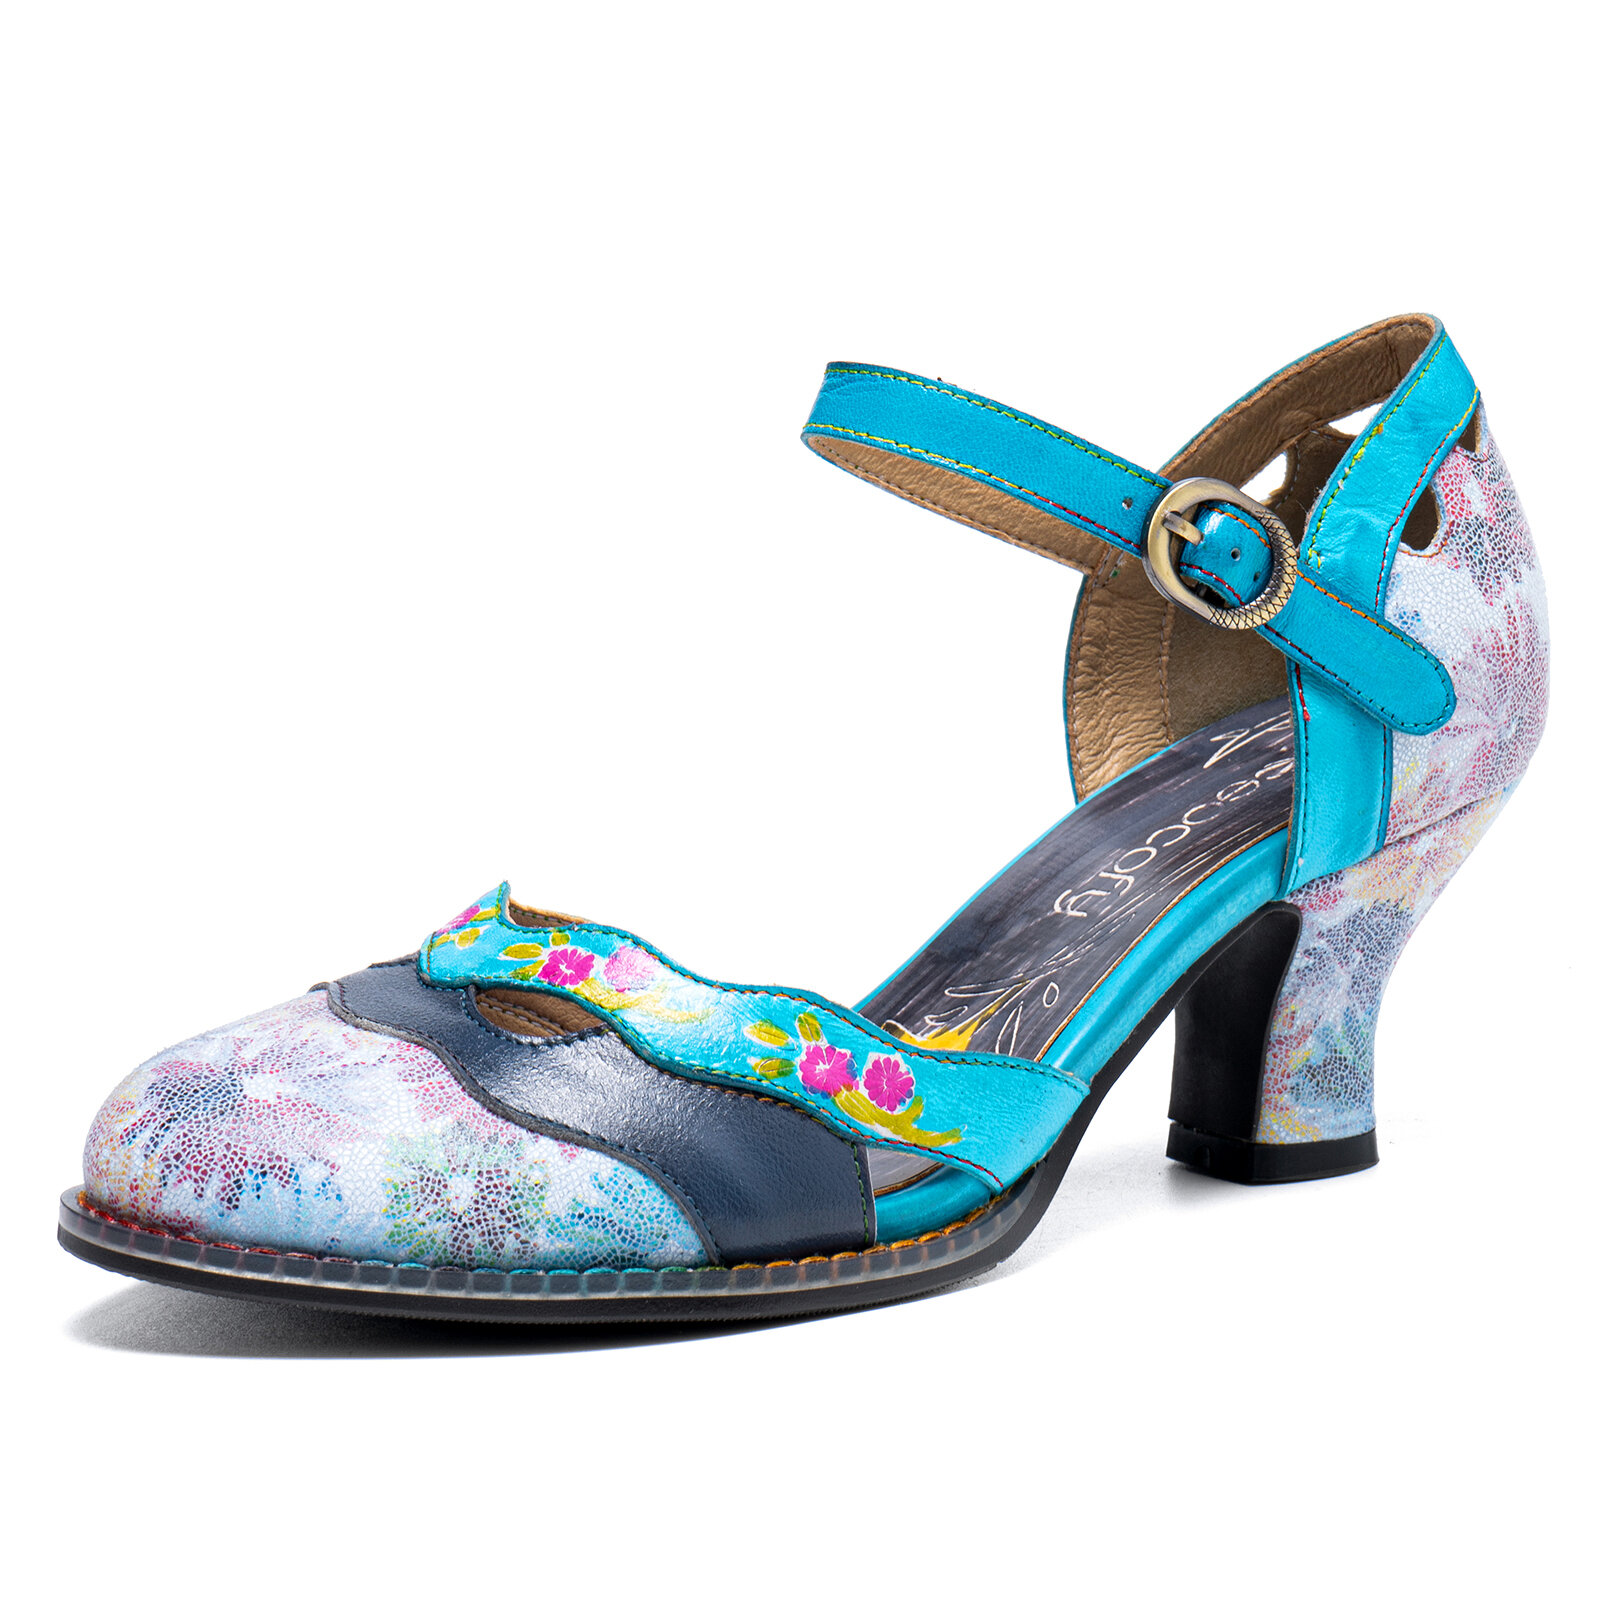 

Socofy Genuine Leather Retro Buckle Fashion Floral Colorblock Comfy Mary Jane Heels